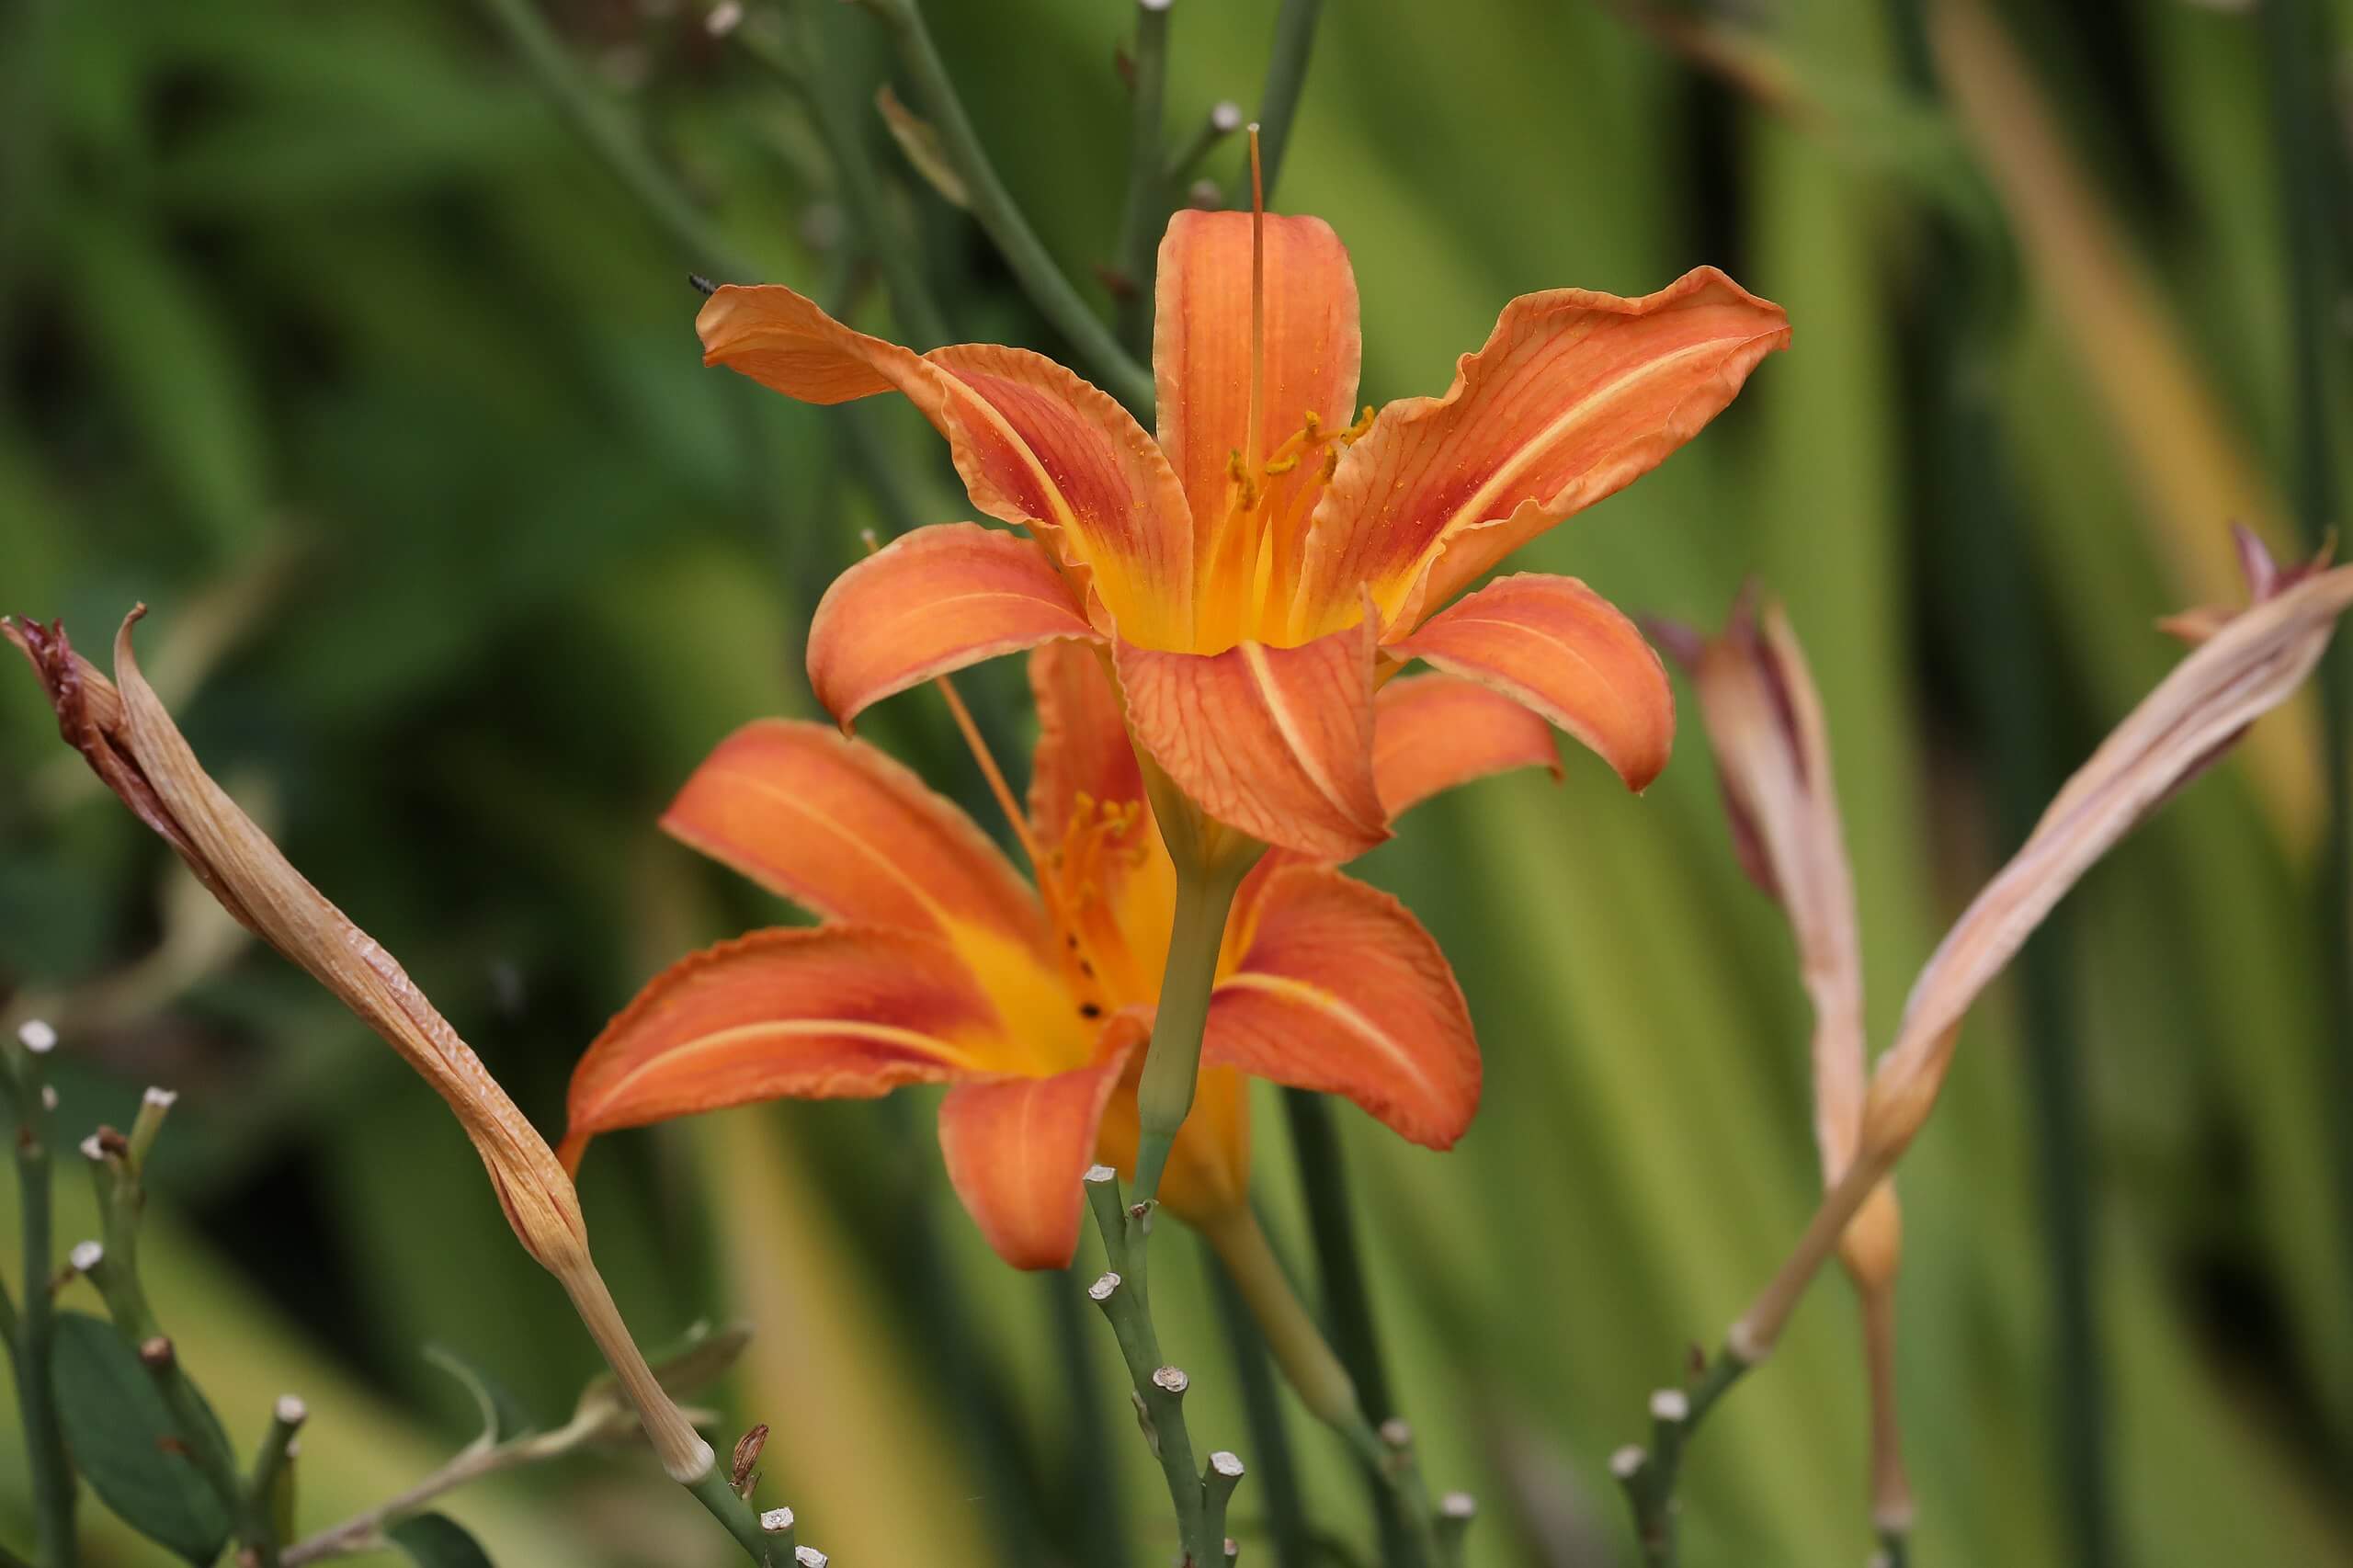 Day Lily, an Ornate and Versatile Edible - Eat The Planet